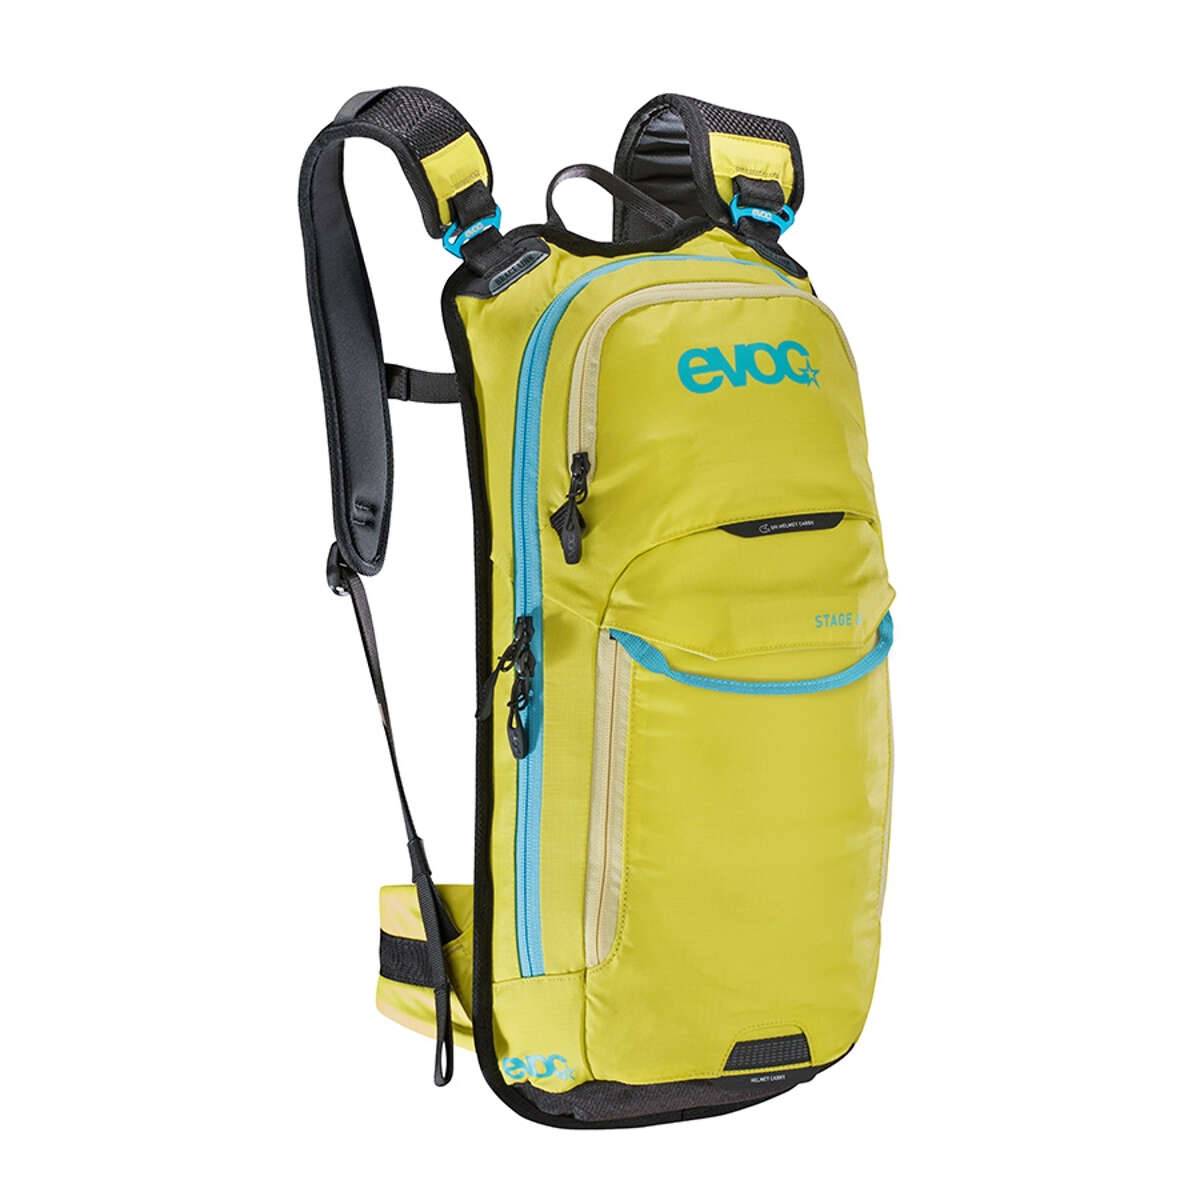 Evoc Backpack with Hydration System Stage Sulphur, 6 Liter